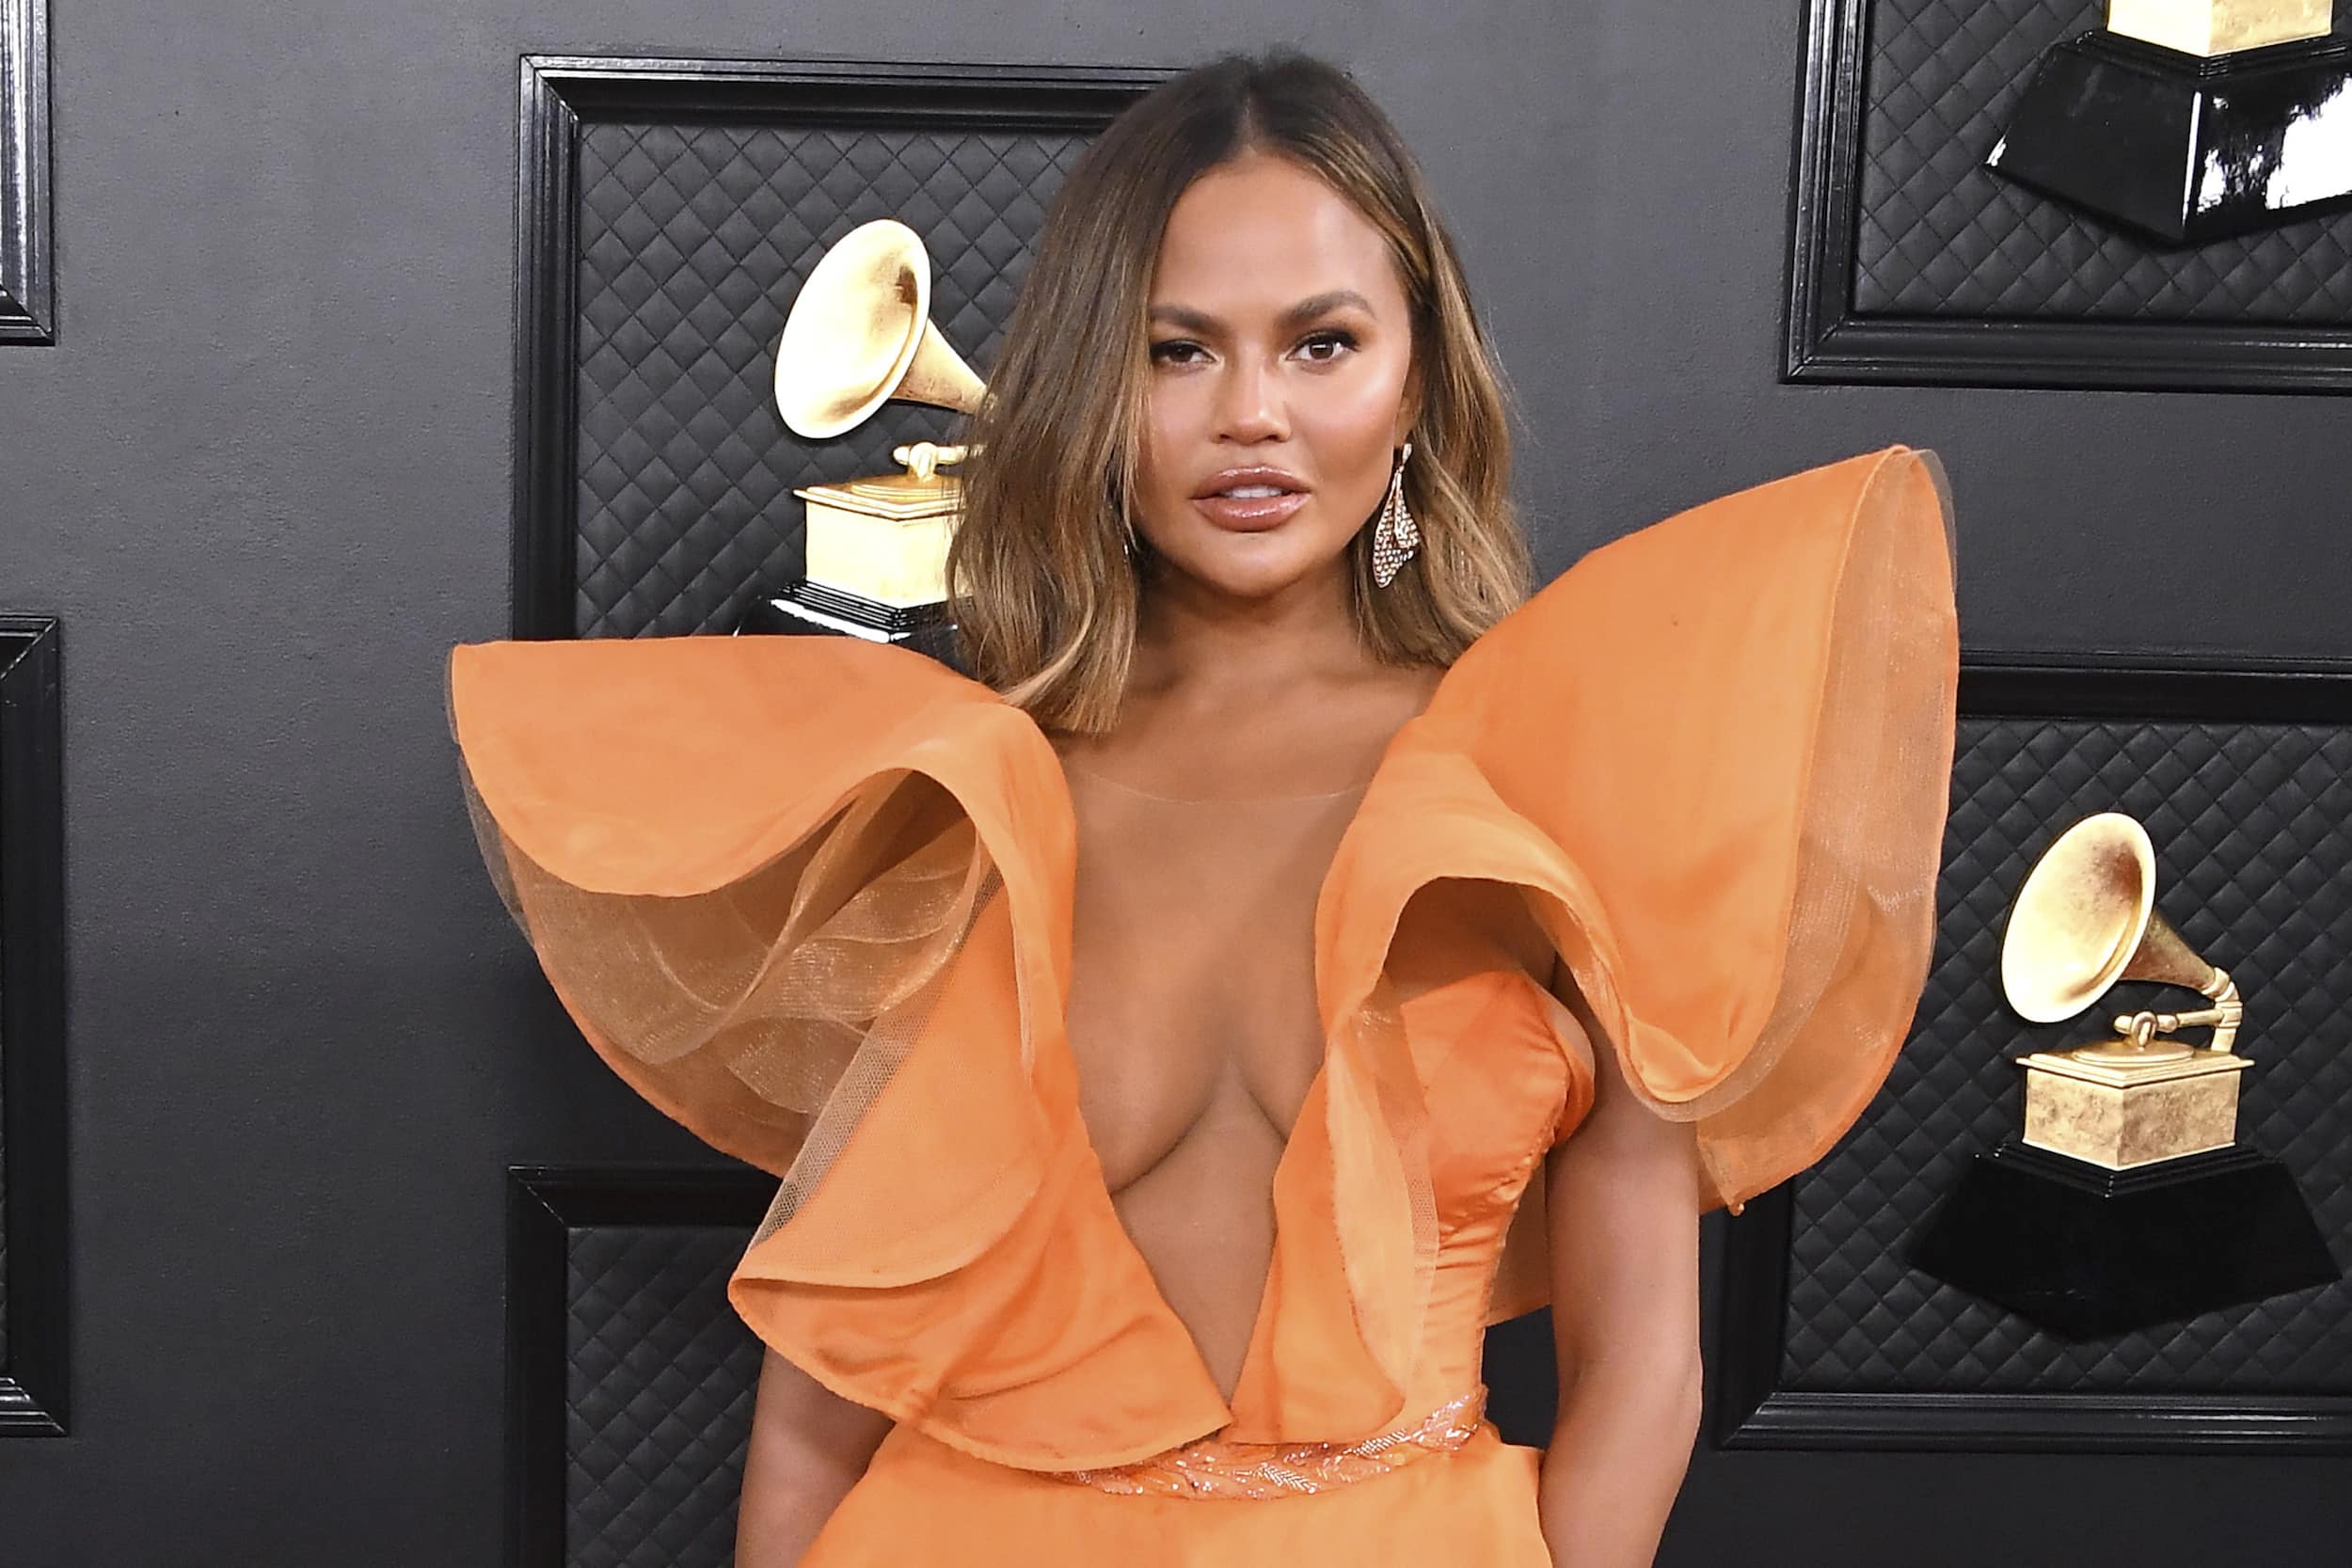 Chrissy Teigen 'getting her boobs out' as she heads for surgery